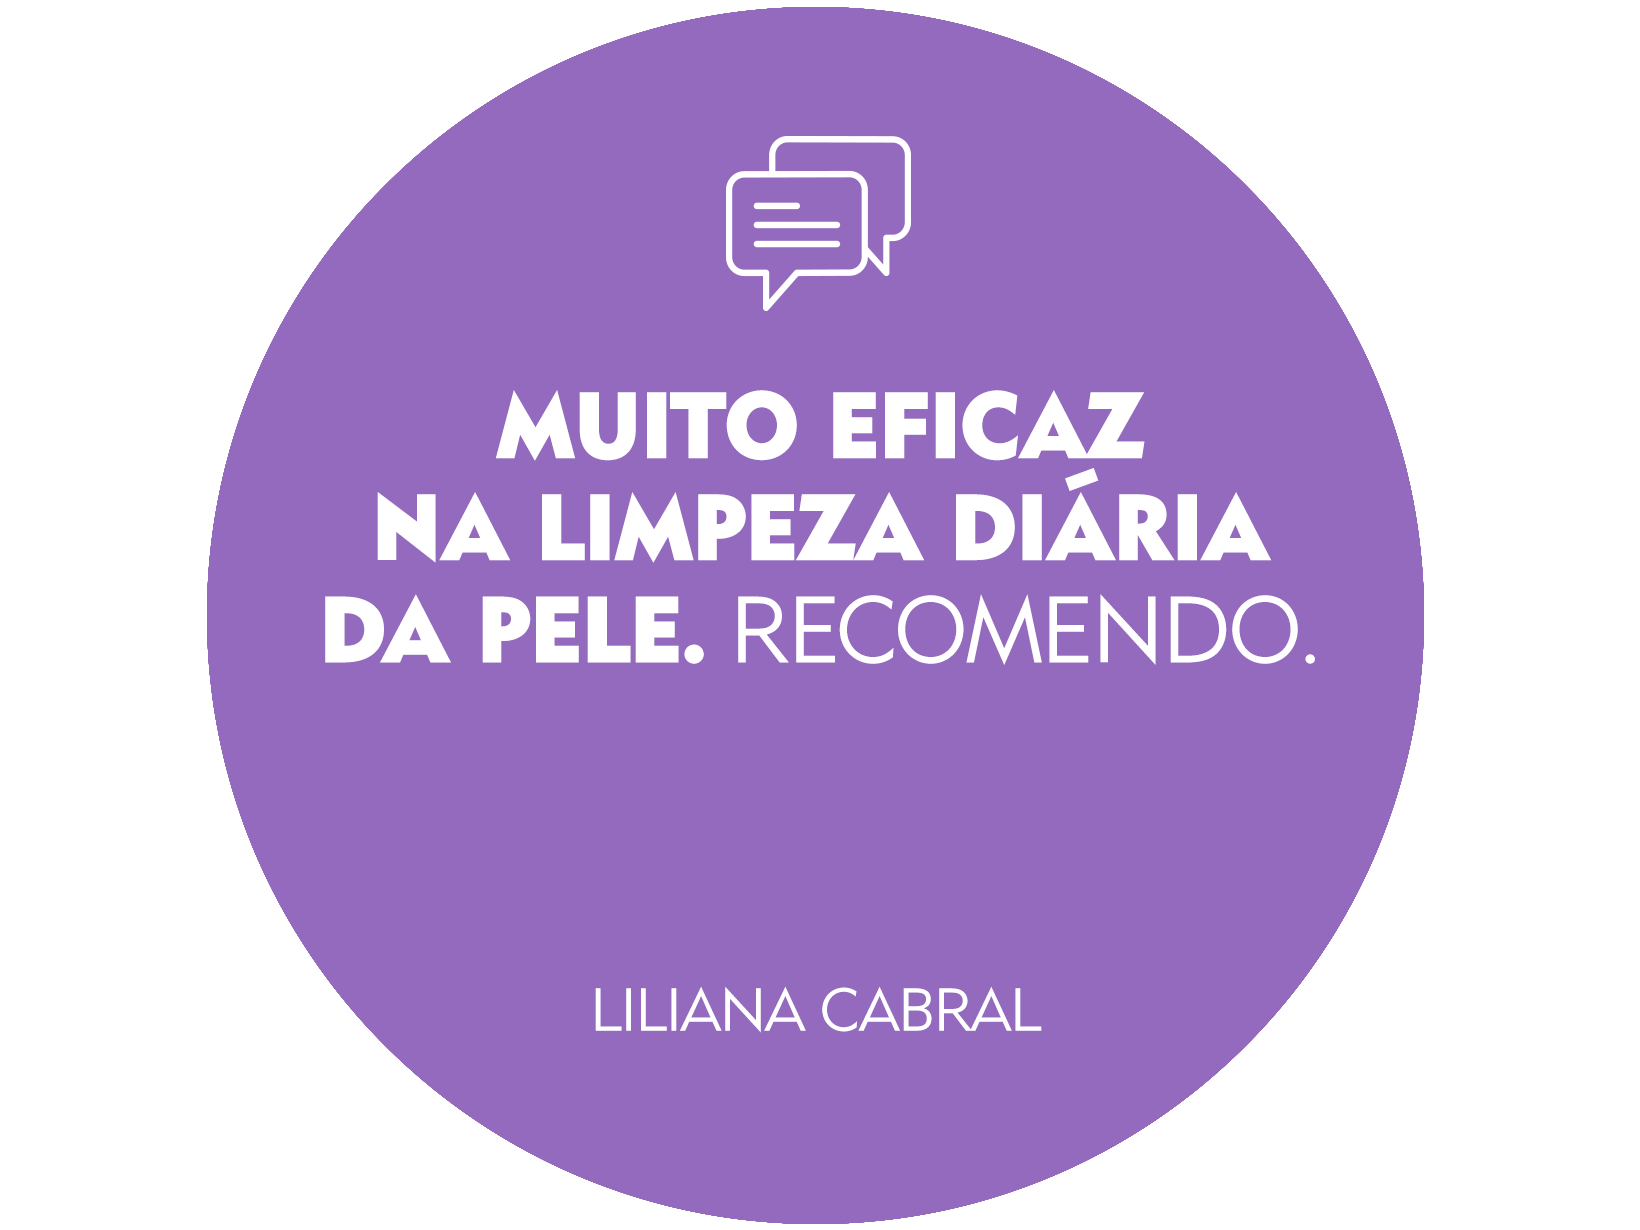 Review Liliana Cabral